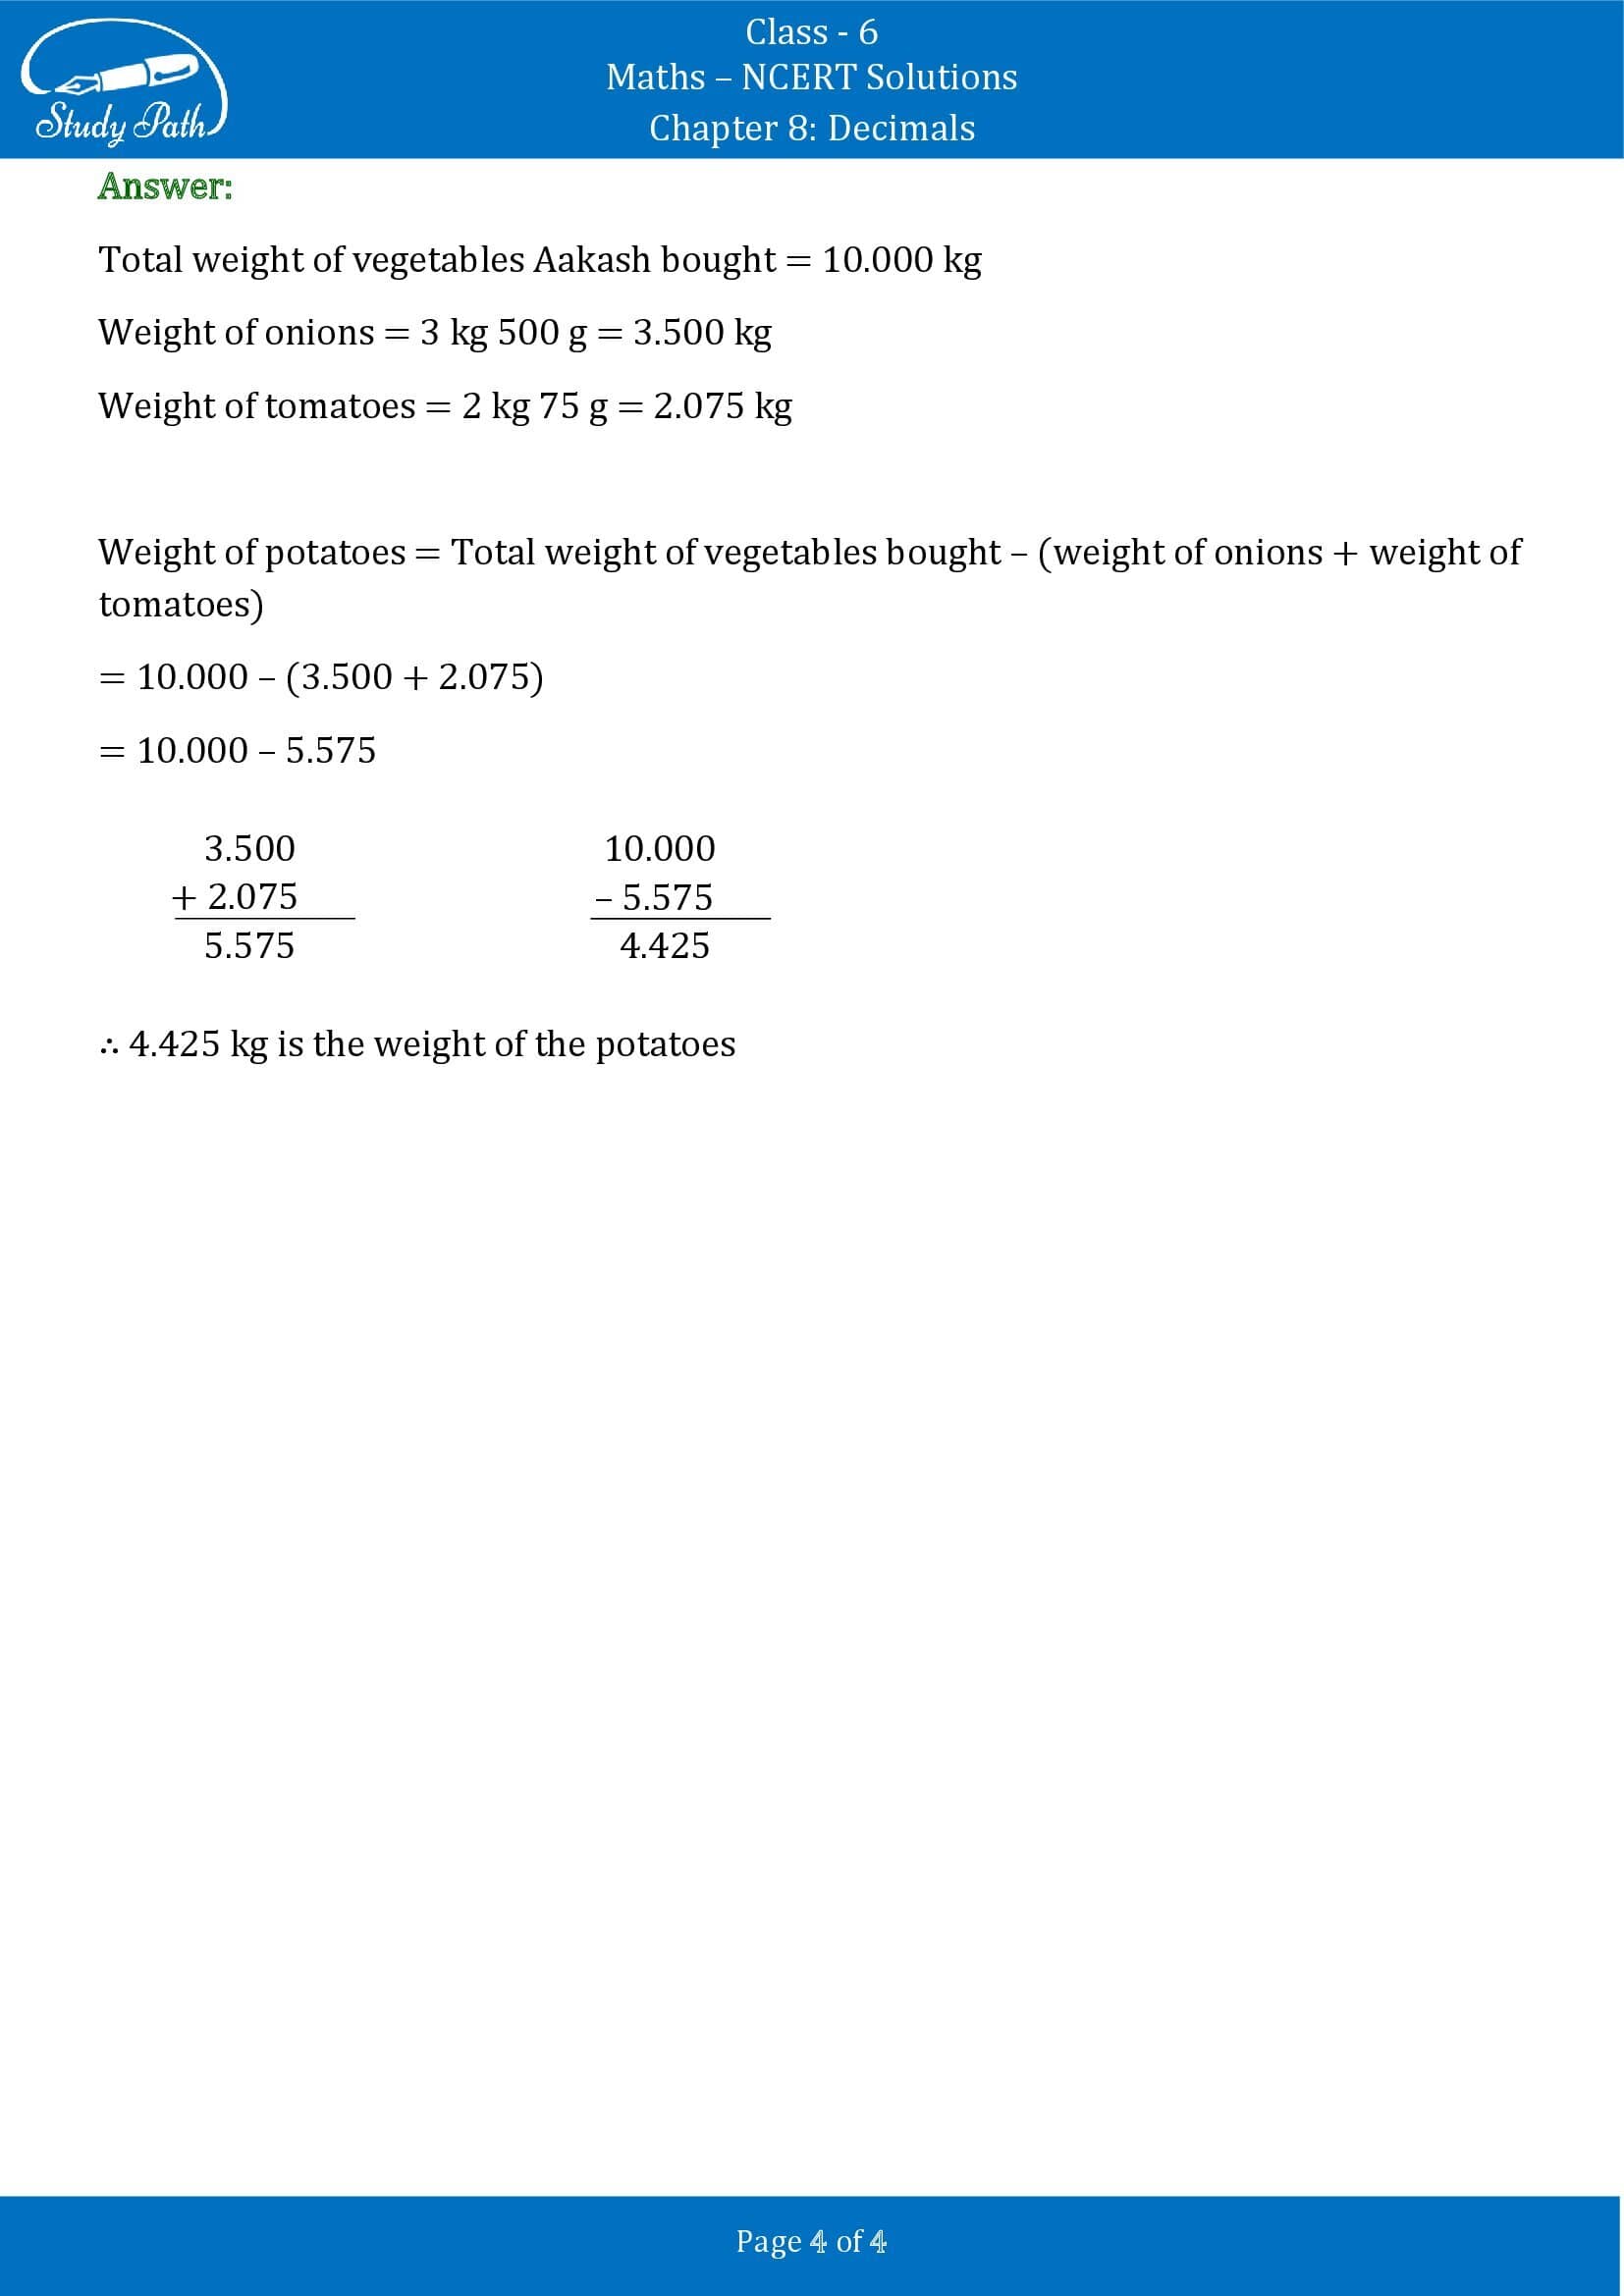 NCERT Solutions for Class 6 Maths Chapter 8 Decimals Exercise 8.6 00004